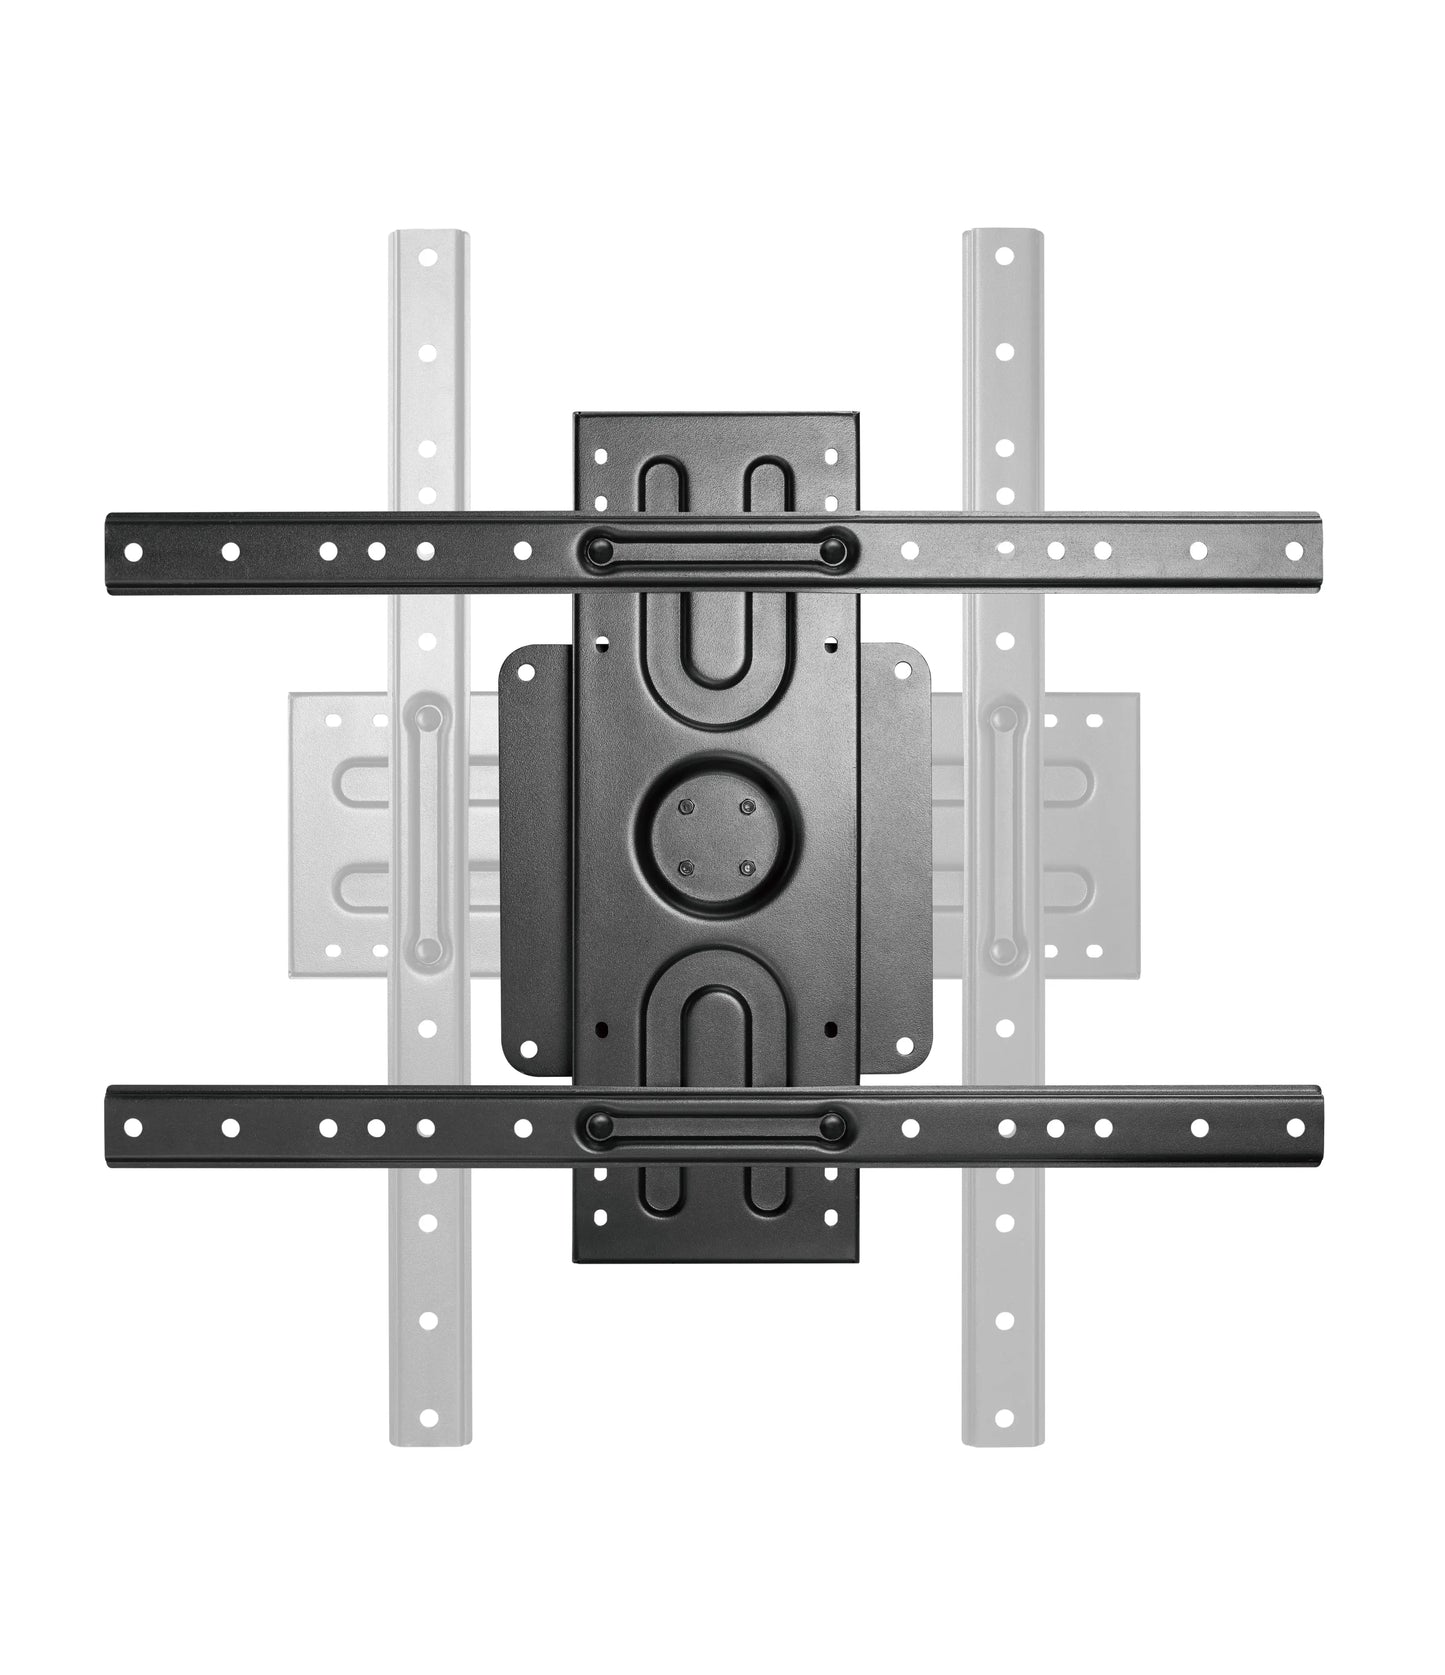 ProMounts Landscape to Portrait Rotating TV Wall Mount for TVs 37”-85” and up to 110lbs (AMR6401)